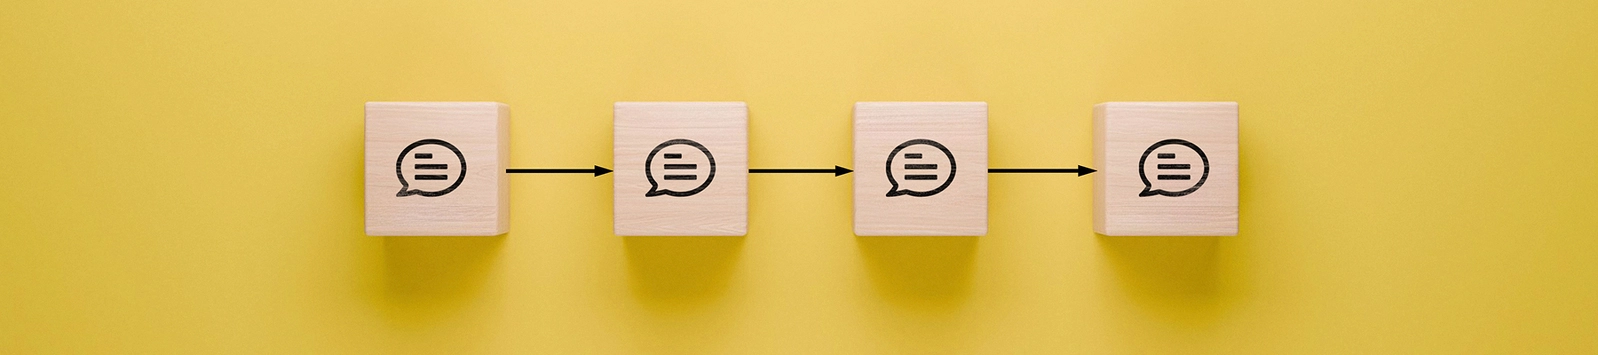 Communication flow and feedback loop concept illustrated with wooden blocks